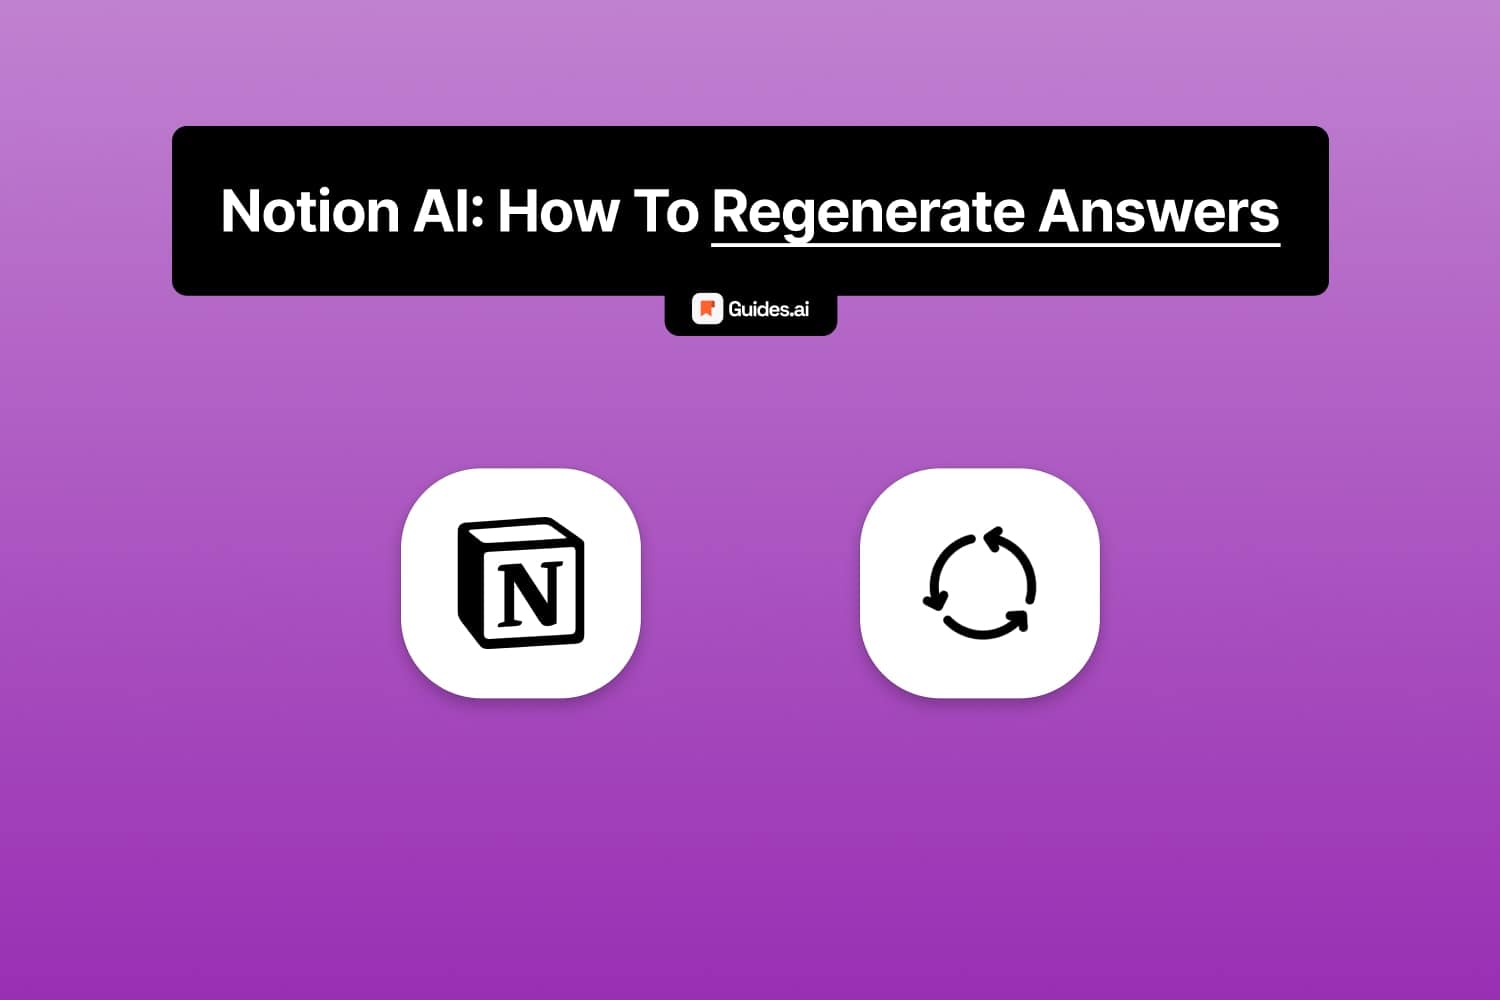 How to regenerate a response in Notion AI